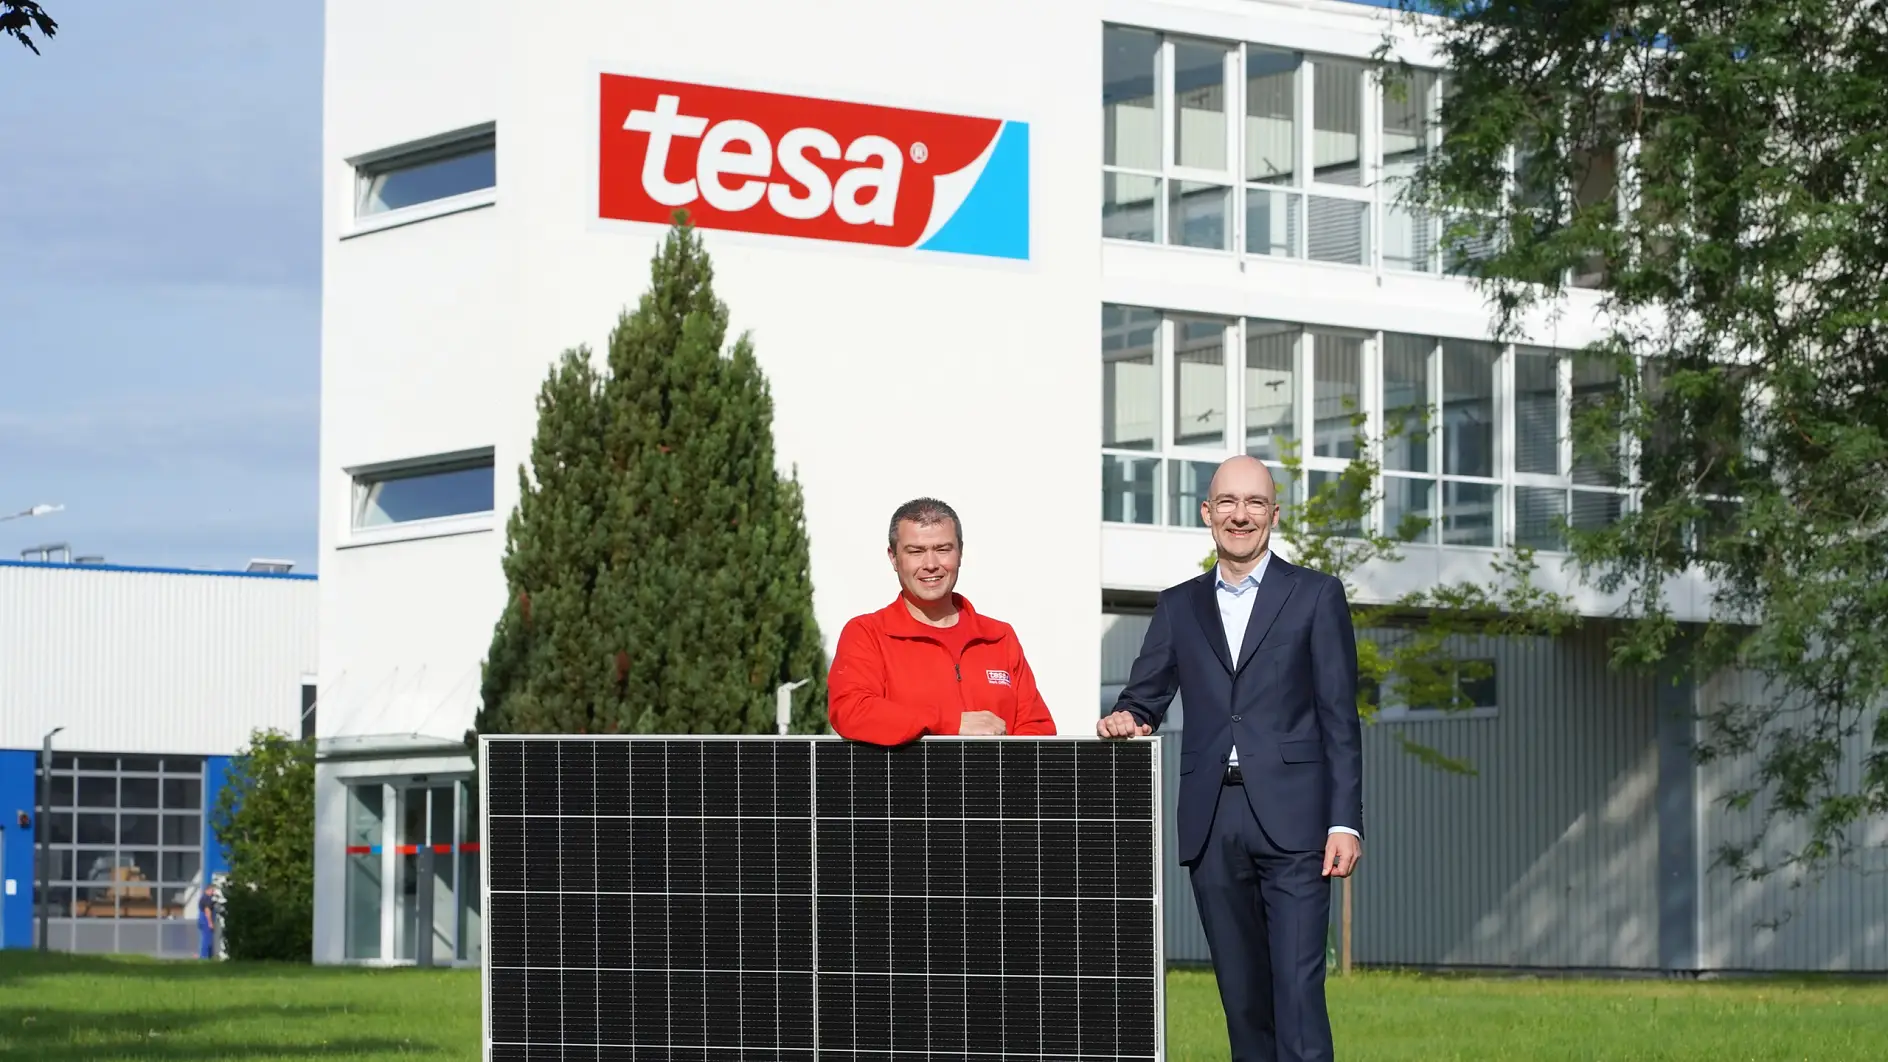 tesa focuses on sustainability: Plant Manager Holger Rauth (right) and Tobias Wolter, Team Leader Energy and Training (left), proudly display one of the approximately 13,000 photovoltaic modules that will supply the plant with solar energy in the future.